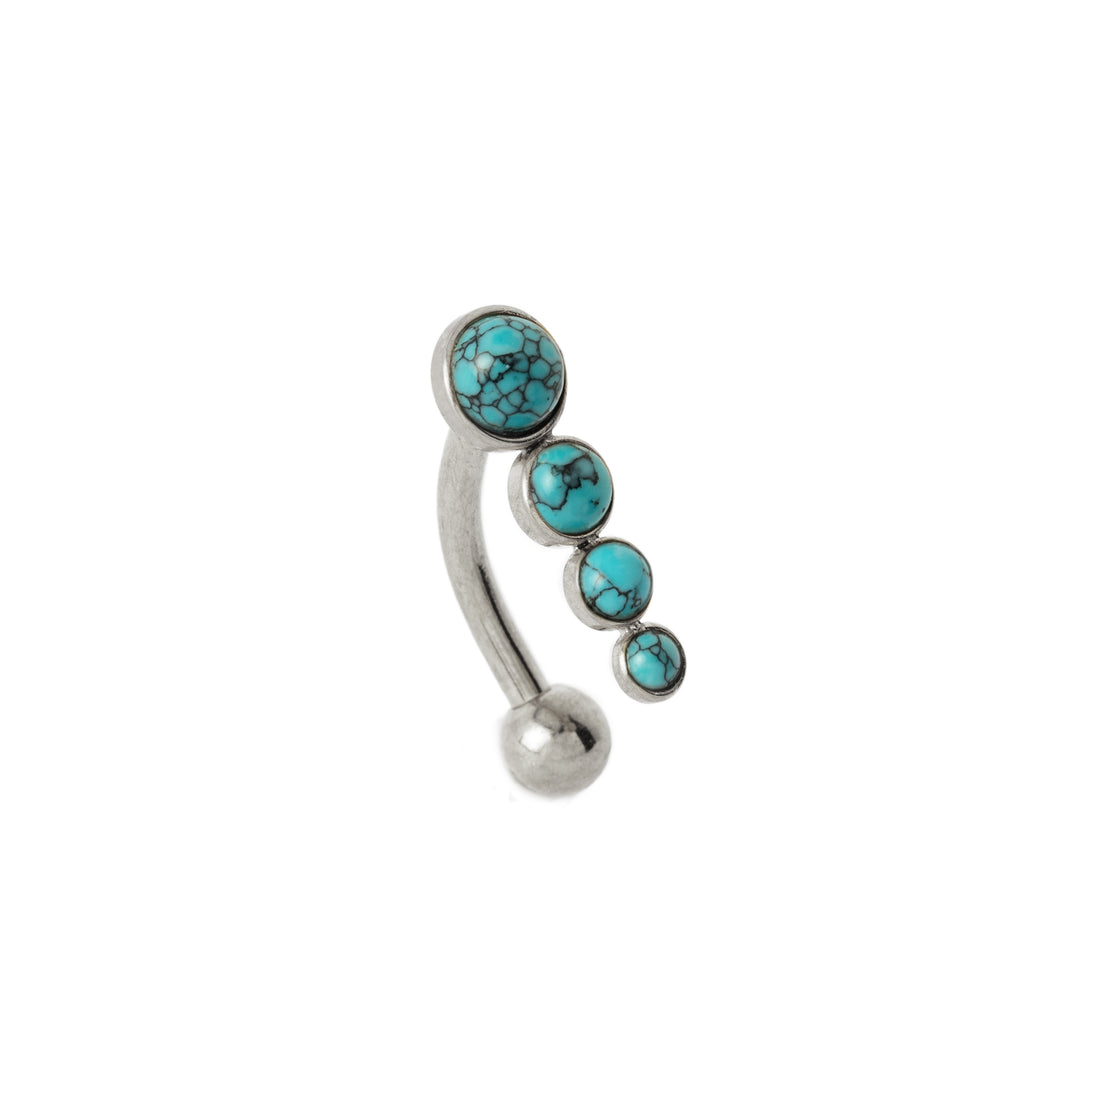 Newton Navel Piercing with Turquoise